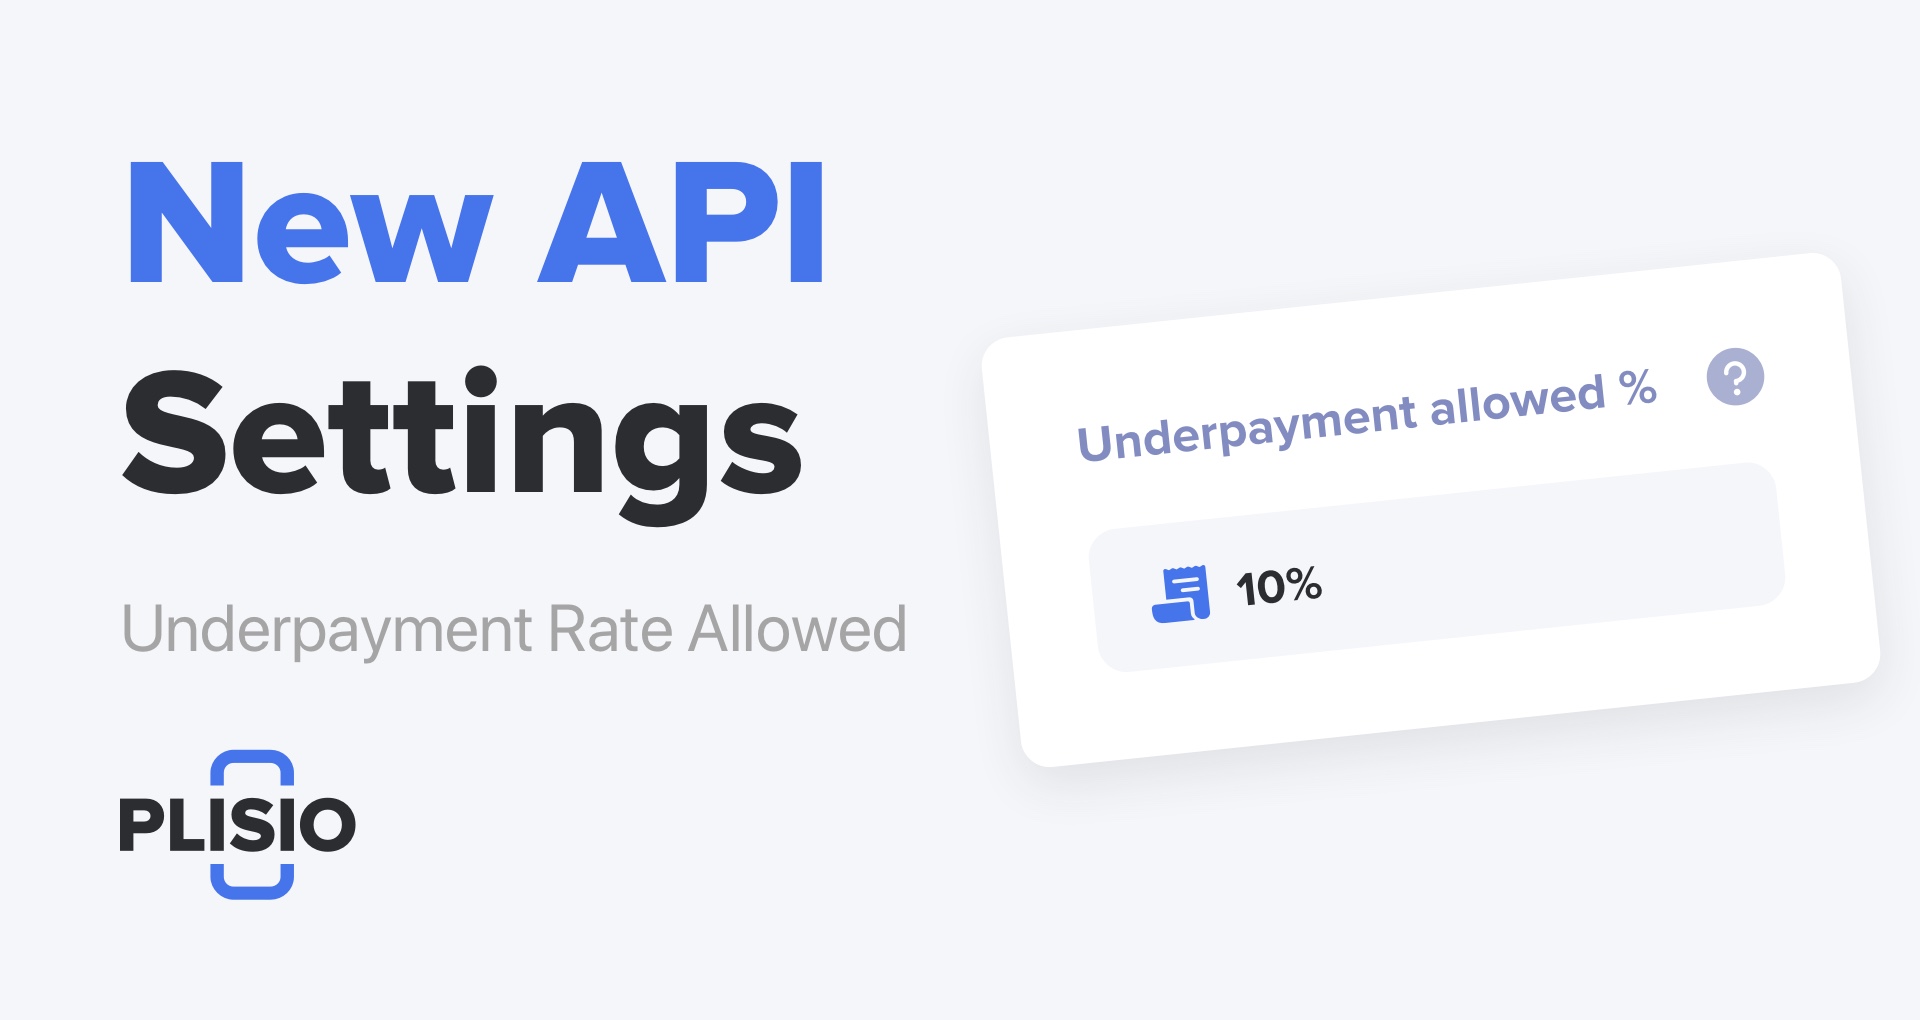 Set the rate of acceptable underpayment. New API settings